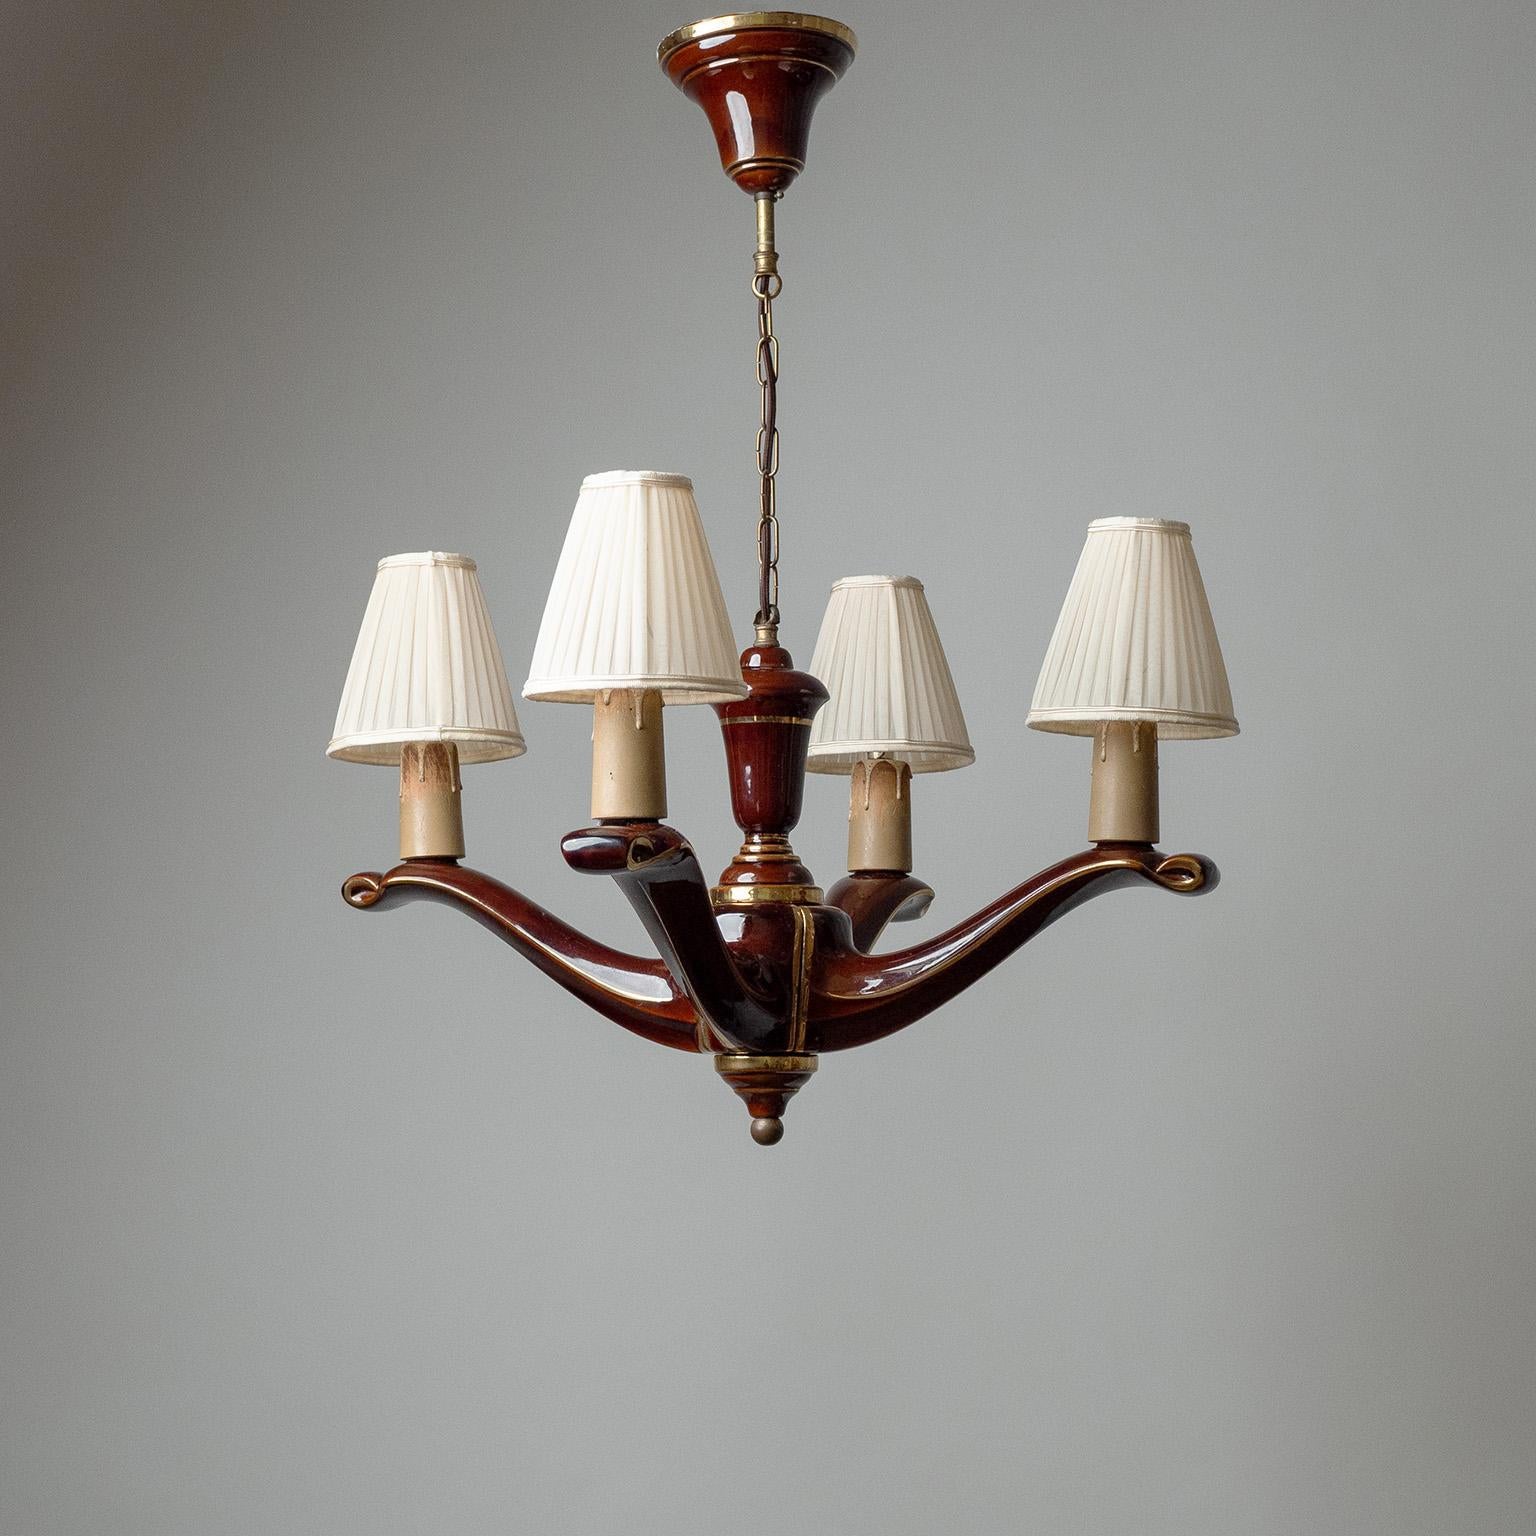 Fine French ceramic chandelier from the 1940s. Four-armed structure made of ceramic glazed in maroon with gold accent stripes. The original socket covers are made of painted wood. Four brass and ceramic E14 sockets with new wiring and shades.